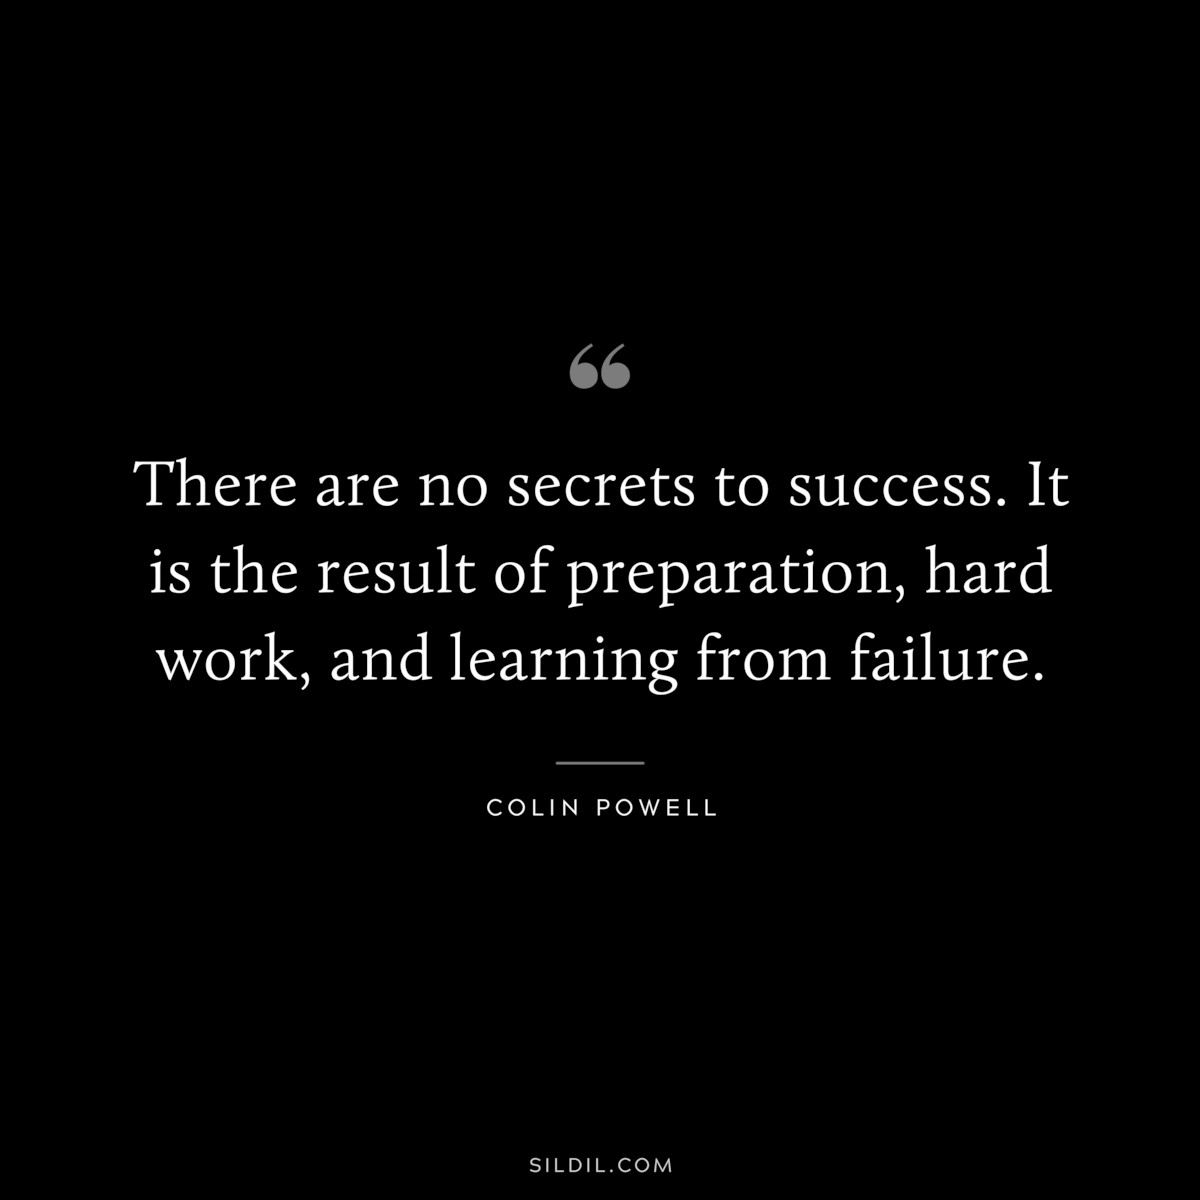 There are no secrets to success. It is the result of preparation, hard work, and learning from failure. ― Colin Powell